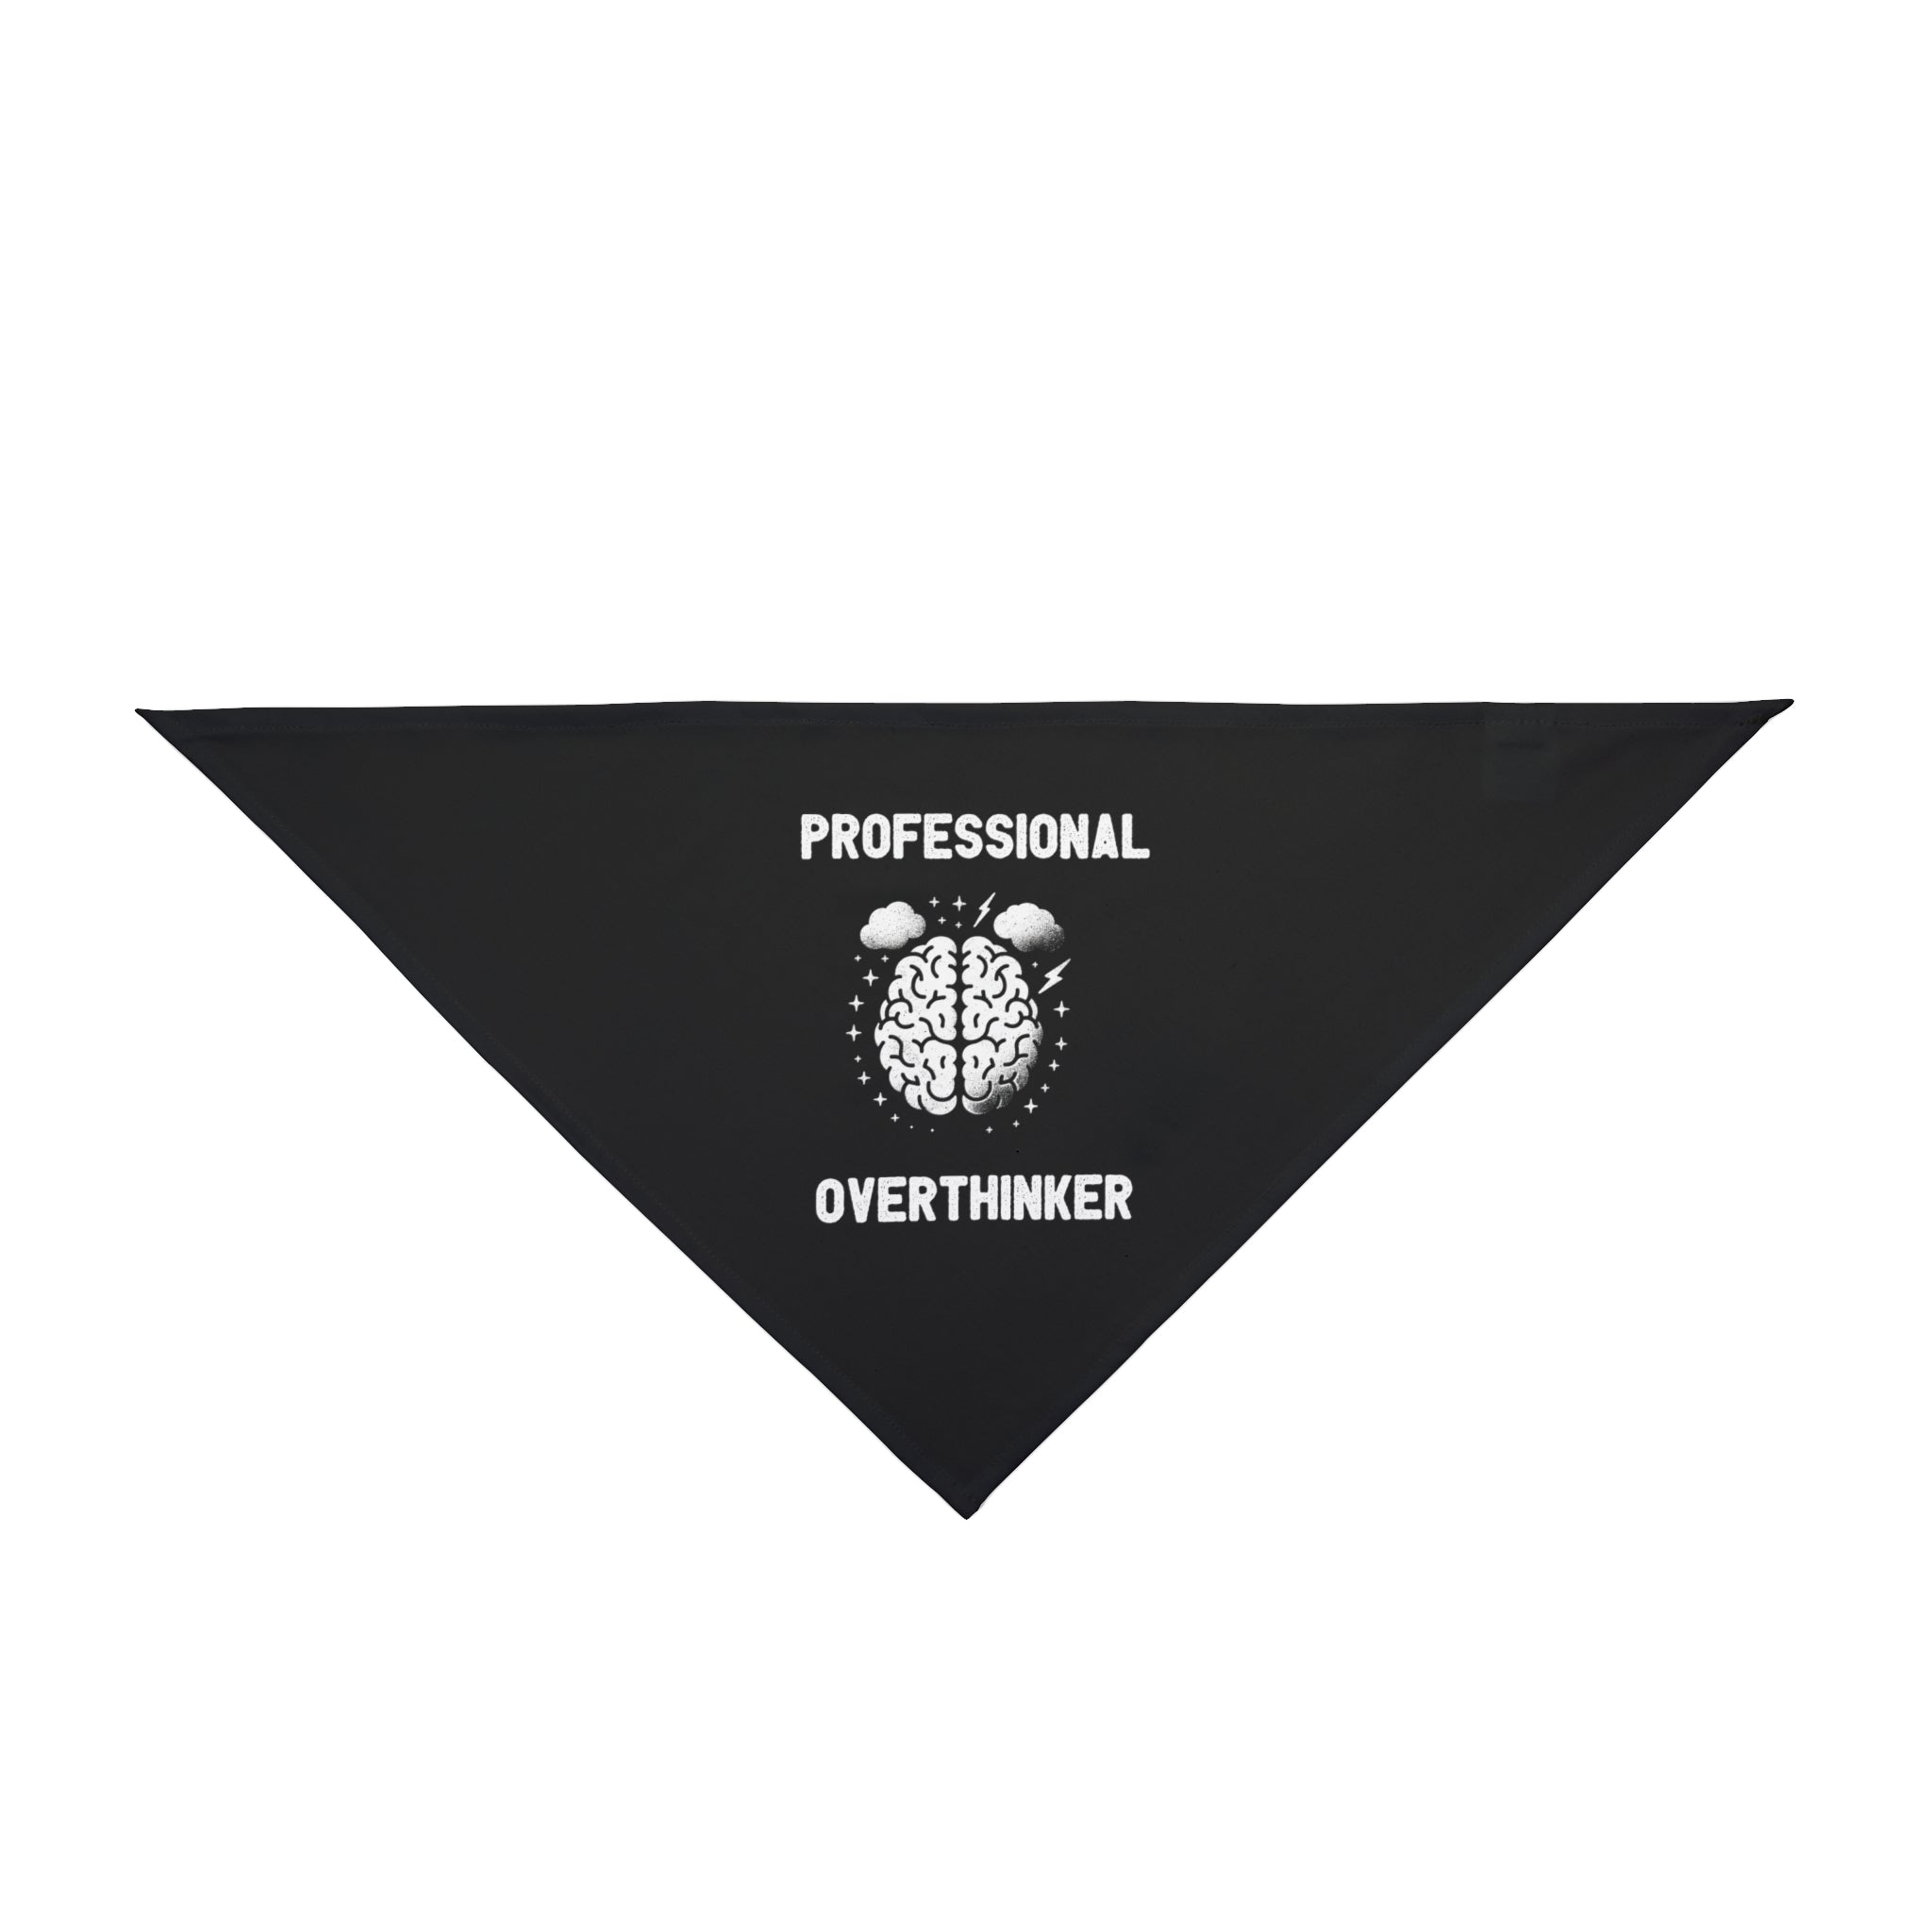 A black triangular scarf, crafted as a polyester pet bandana, is printed with a graphic of a brain and the words "Professional Overthinker" above and below it, known as the Professional Overthinker - Pet Bandana.